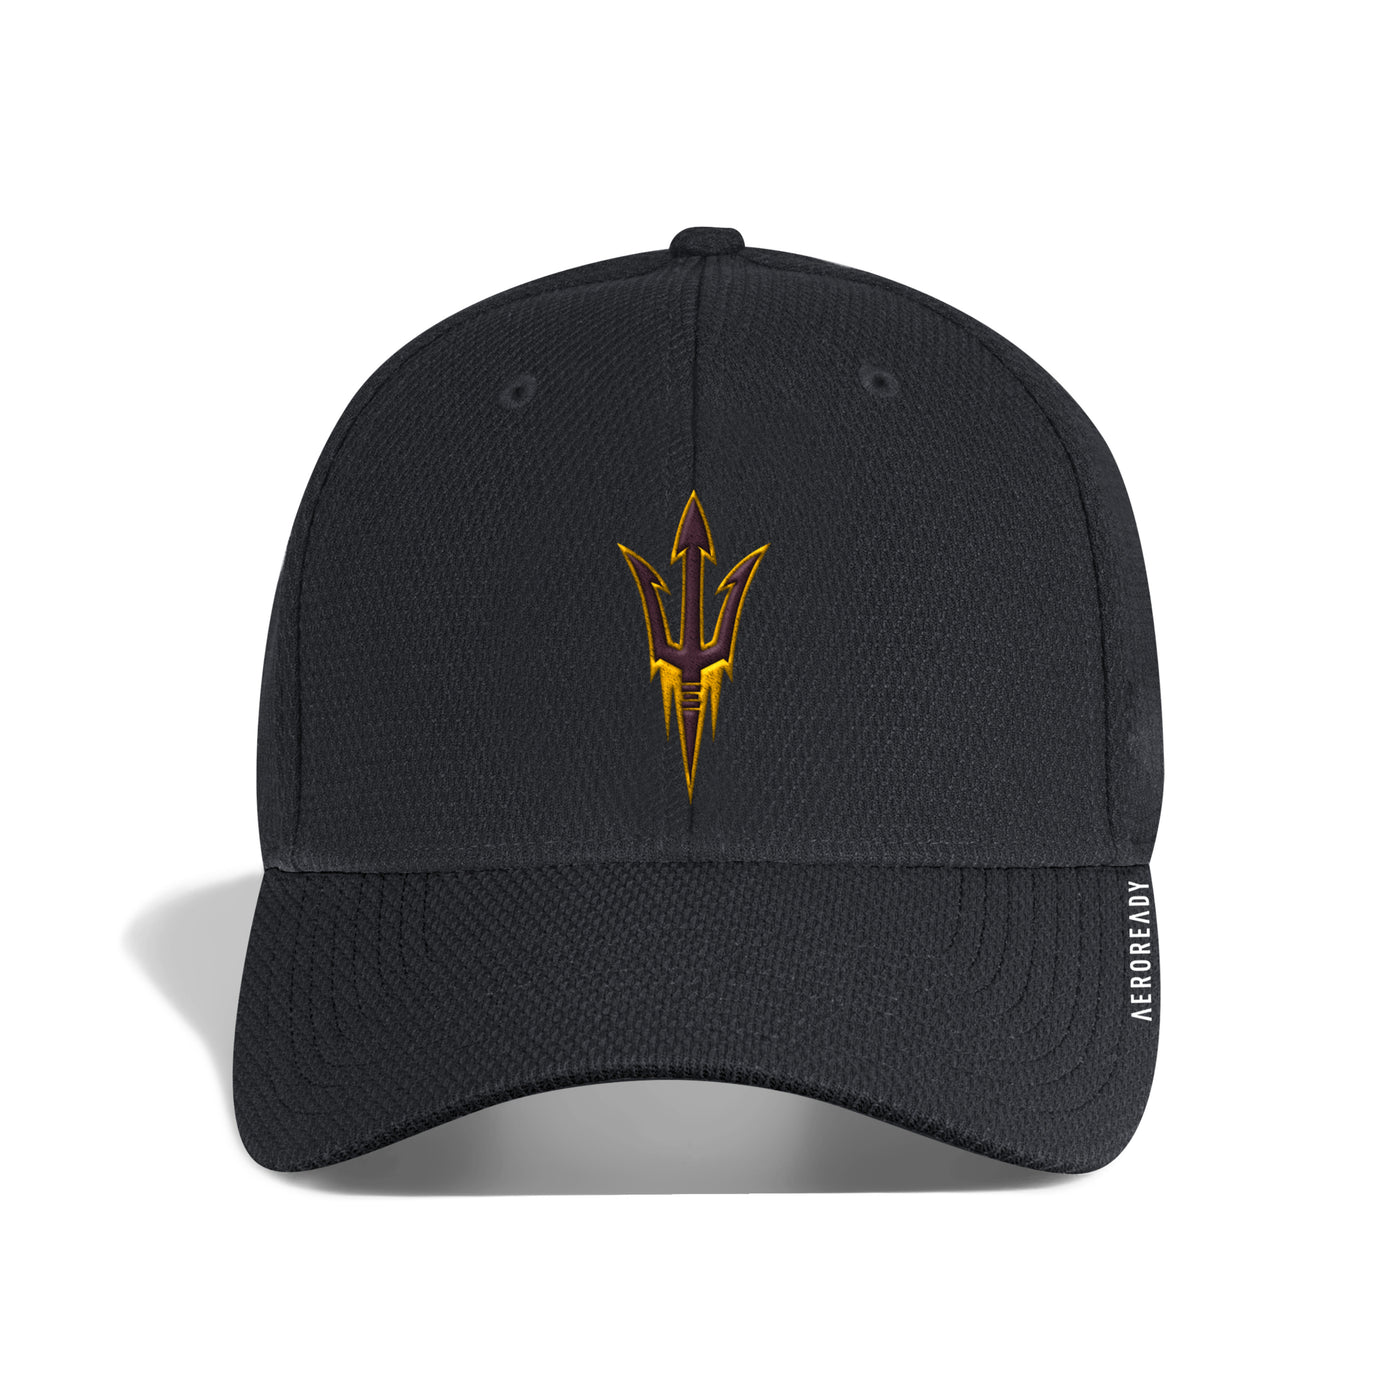 ASU black hat with curved bill and a pitchfork logo on front panel.